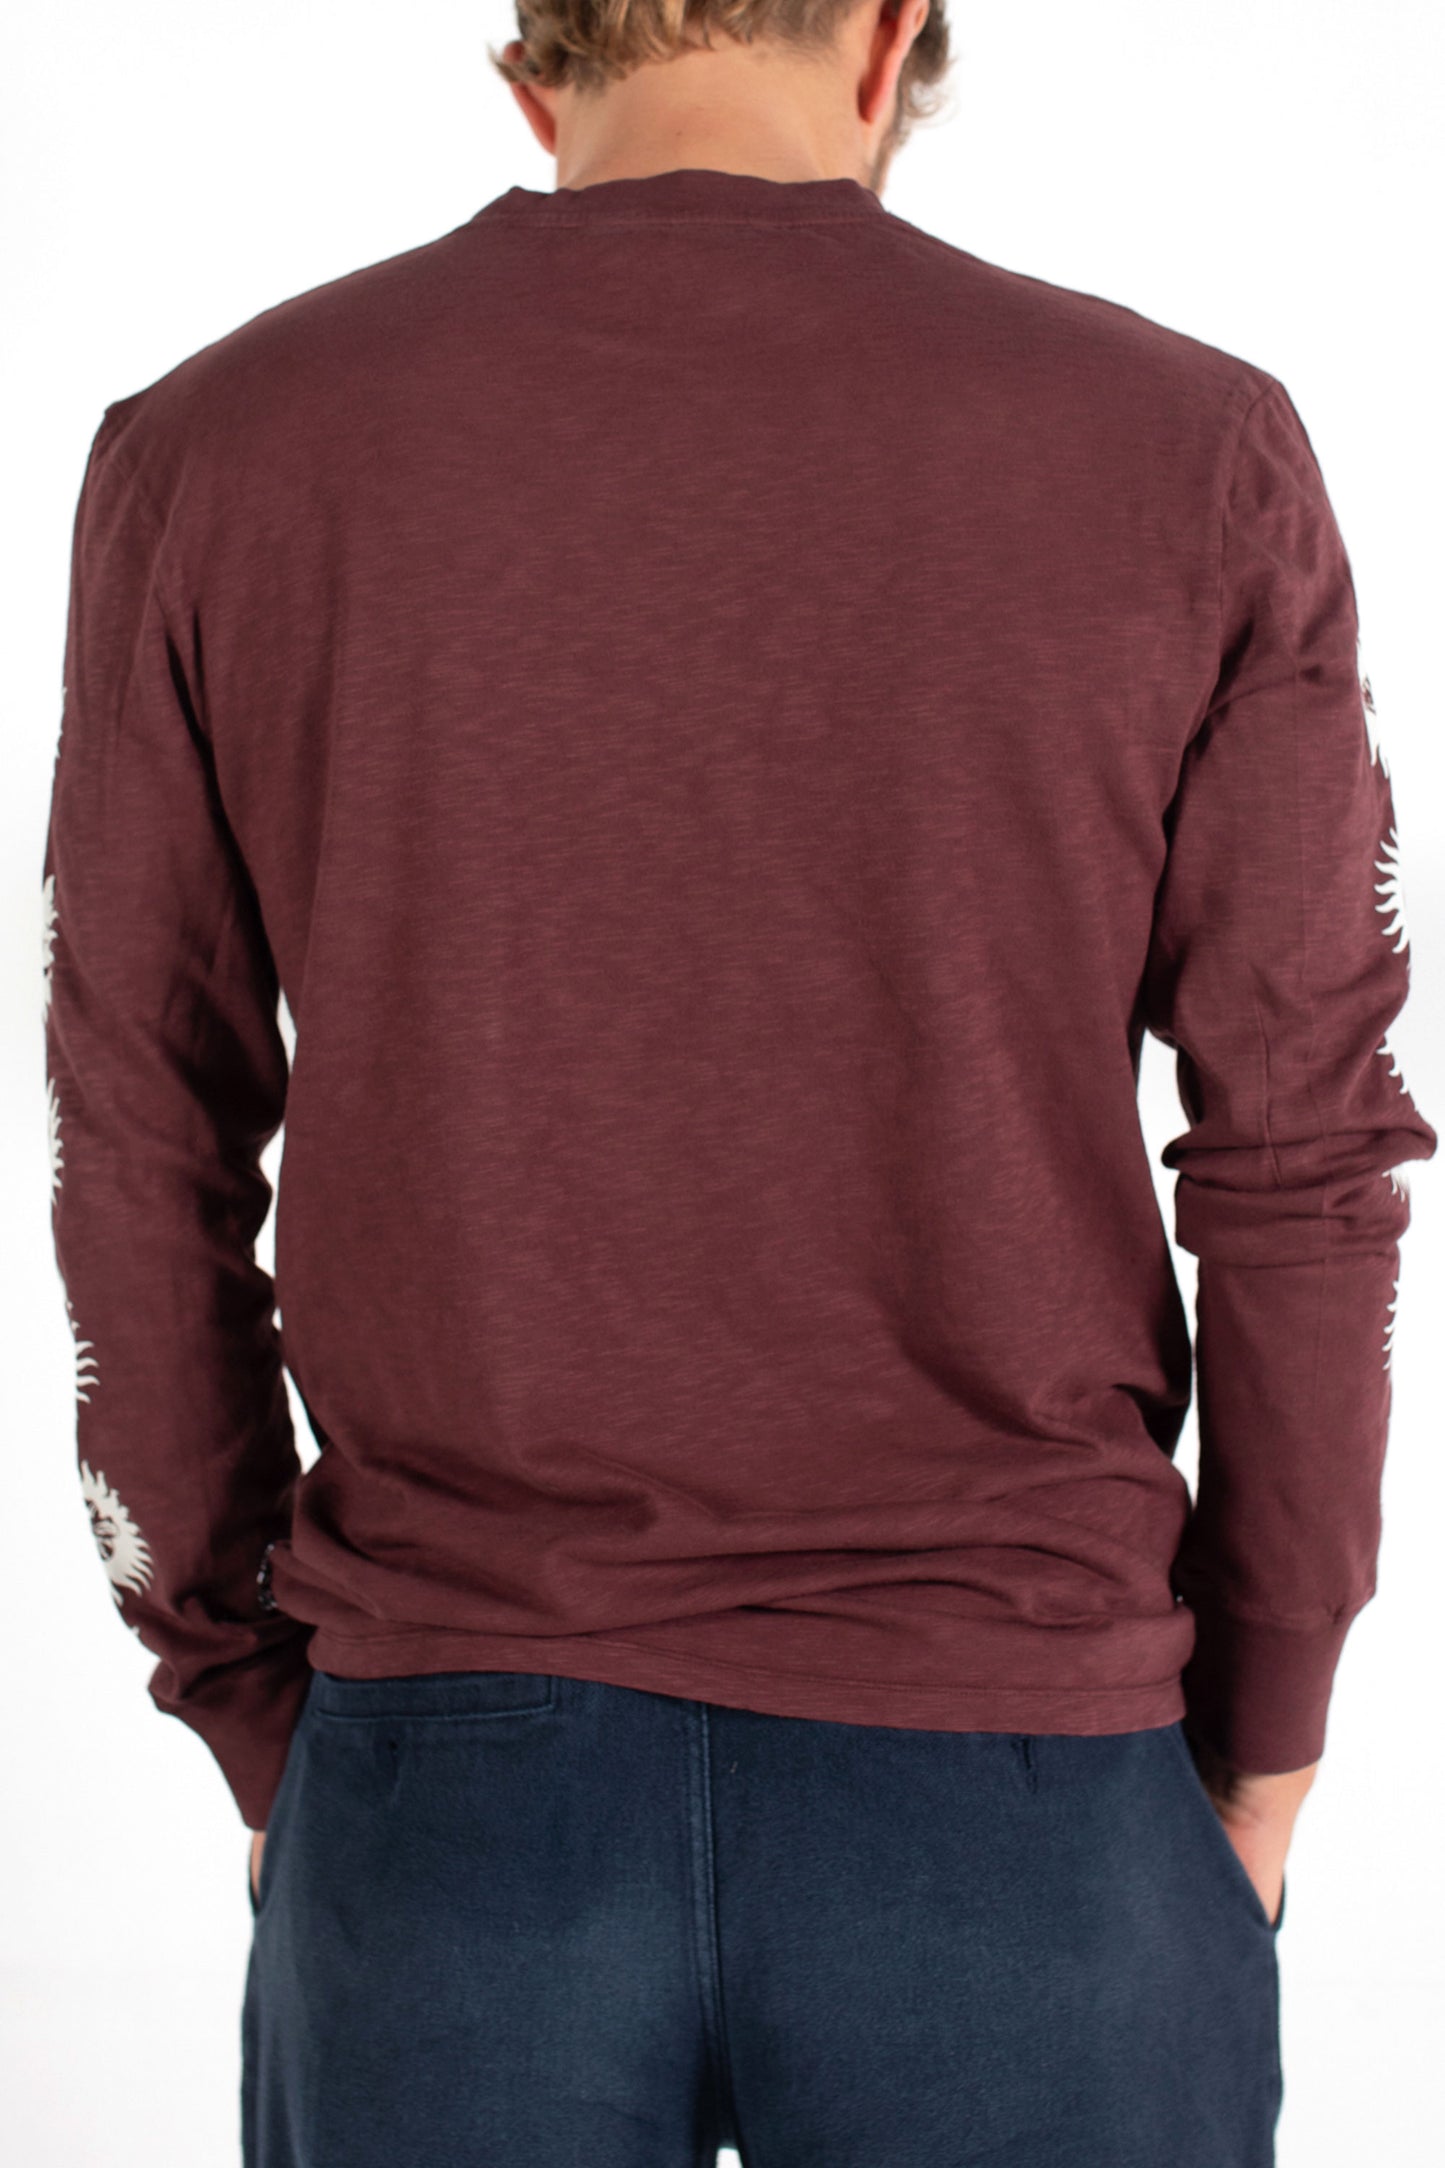 Pukas-Surf-Shop-surfing-the-basque-country-tee-burgundy-5-shells